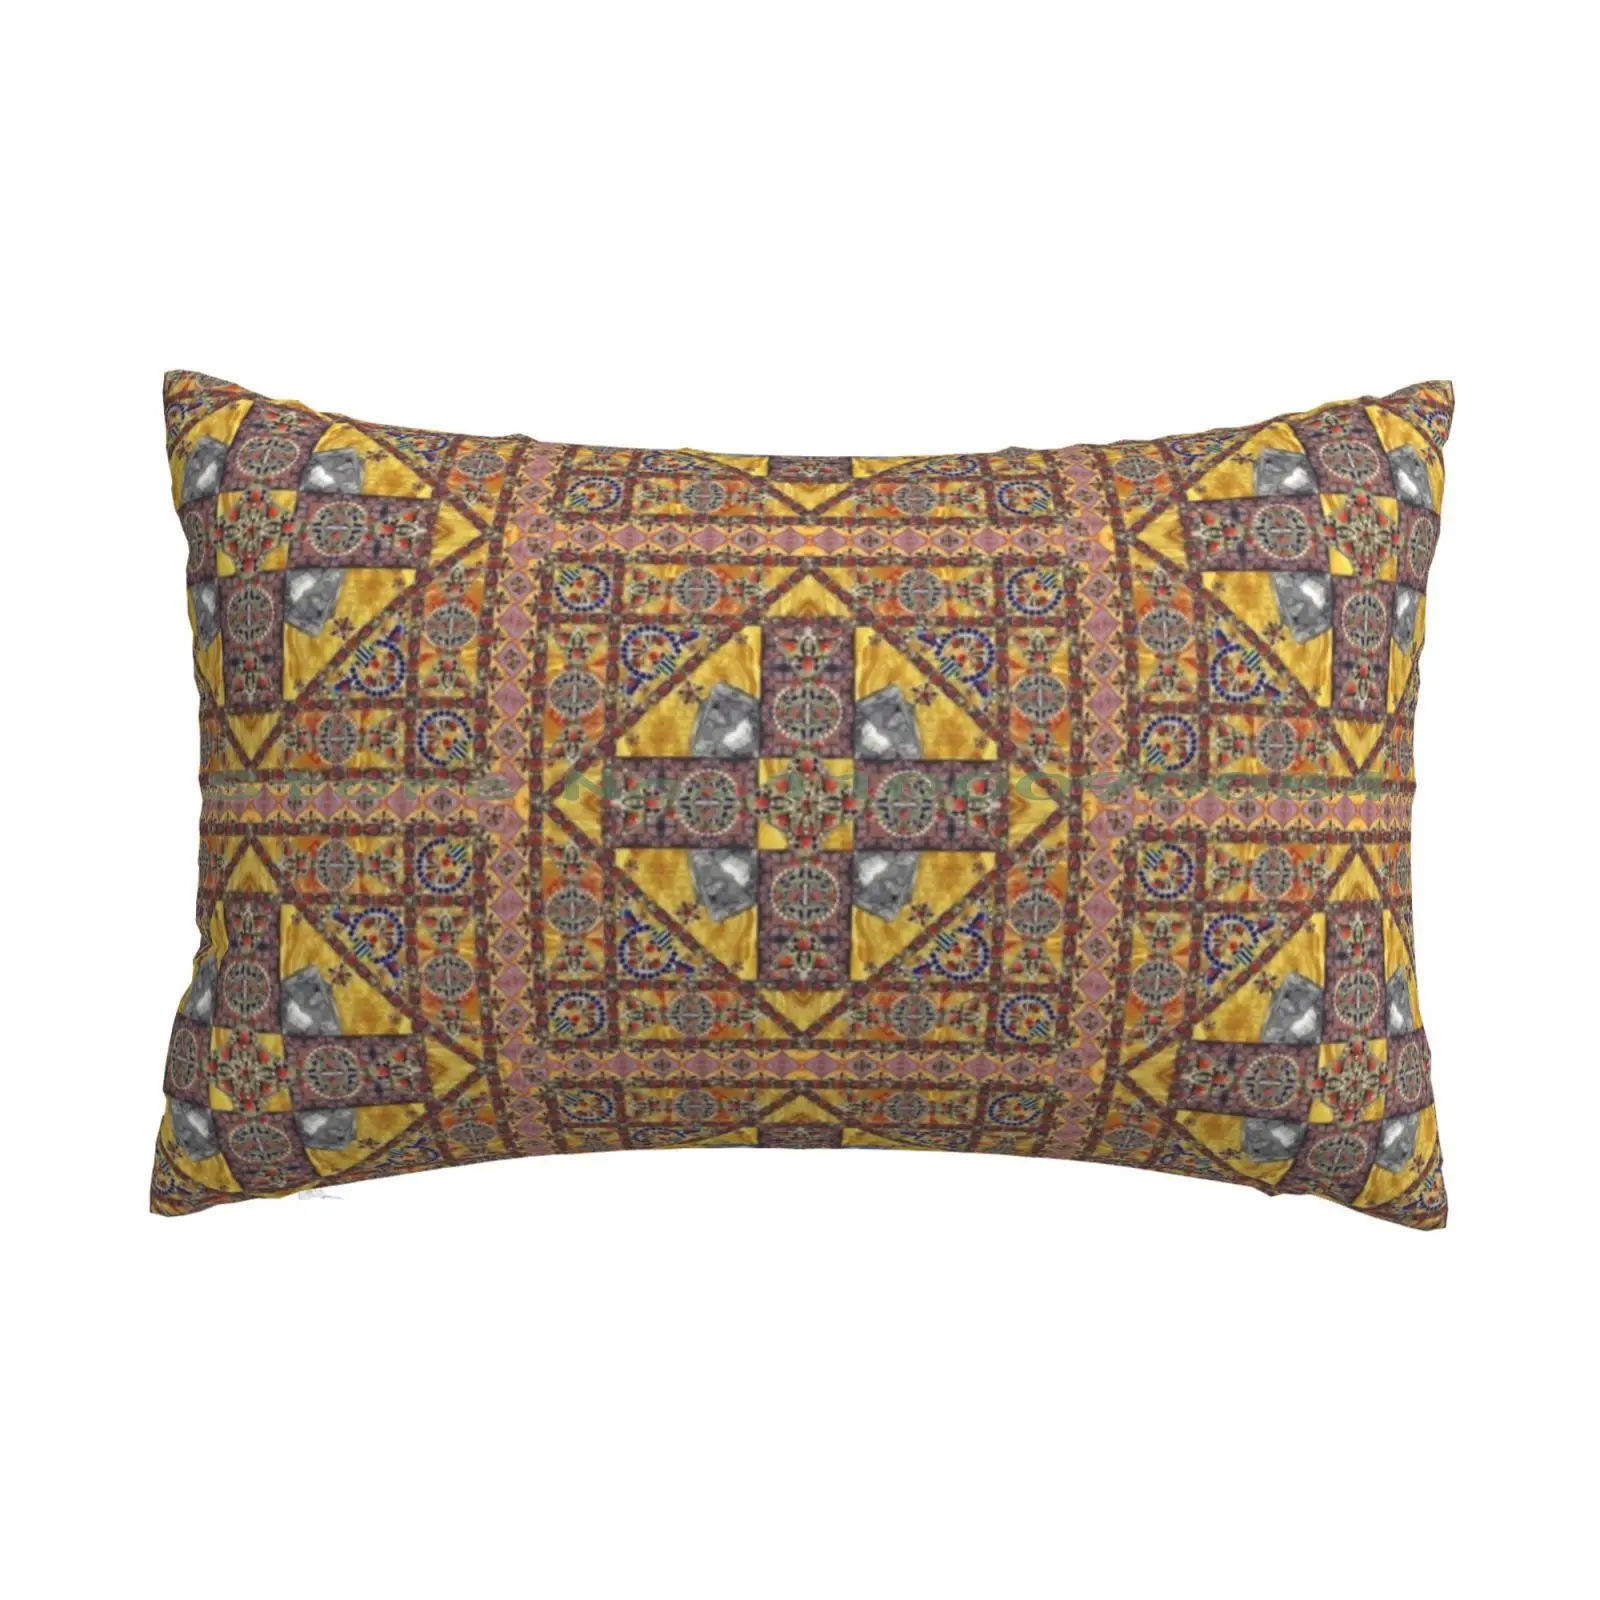 Kabyle Patterns And Jewelry Pillow Case 20x30 50*75 Sofa Bedroom Casamigos Tequila Busch Light Busch Ice Beer Yuengling Esquis